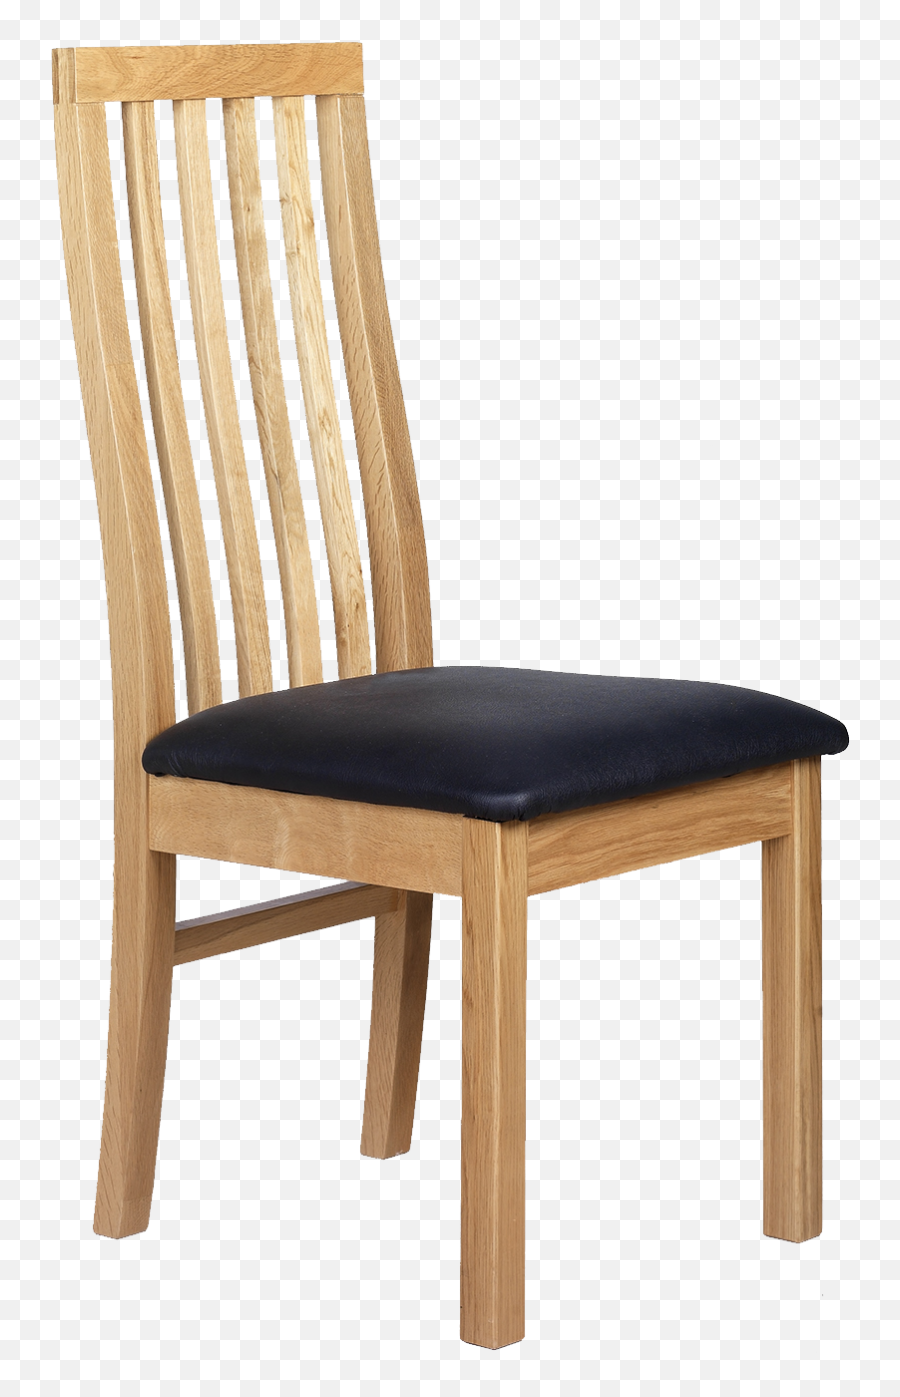 Download Hd Chair Png Images Free - Transparent Background Chair Transparent,Chair Transparent Background